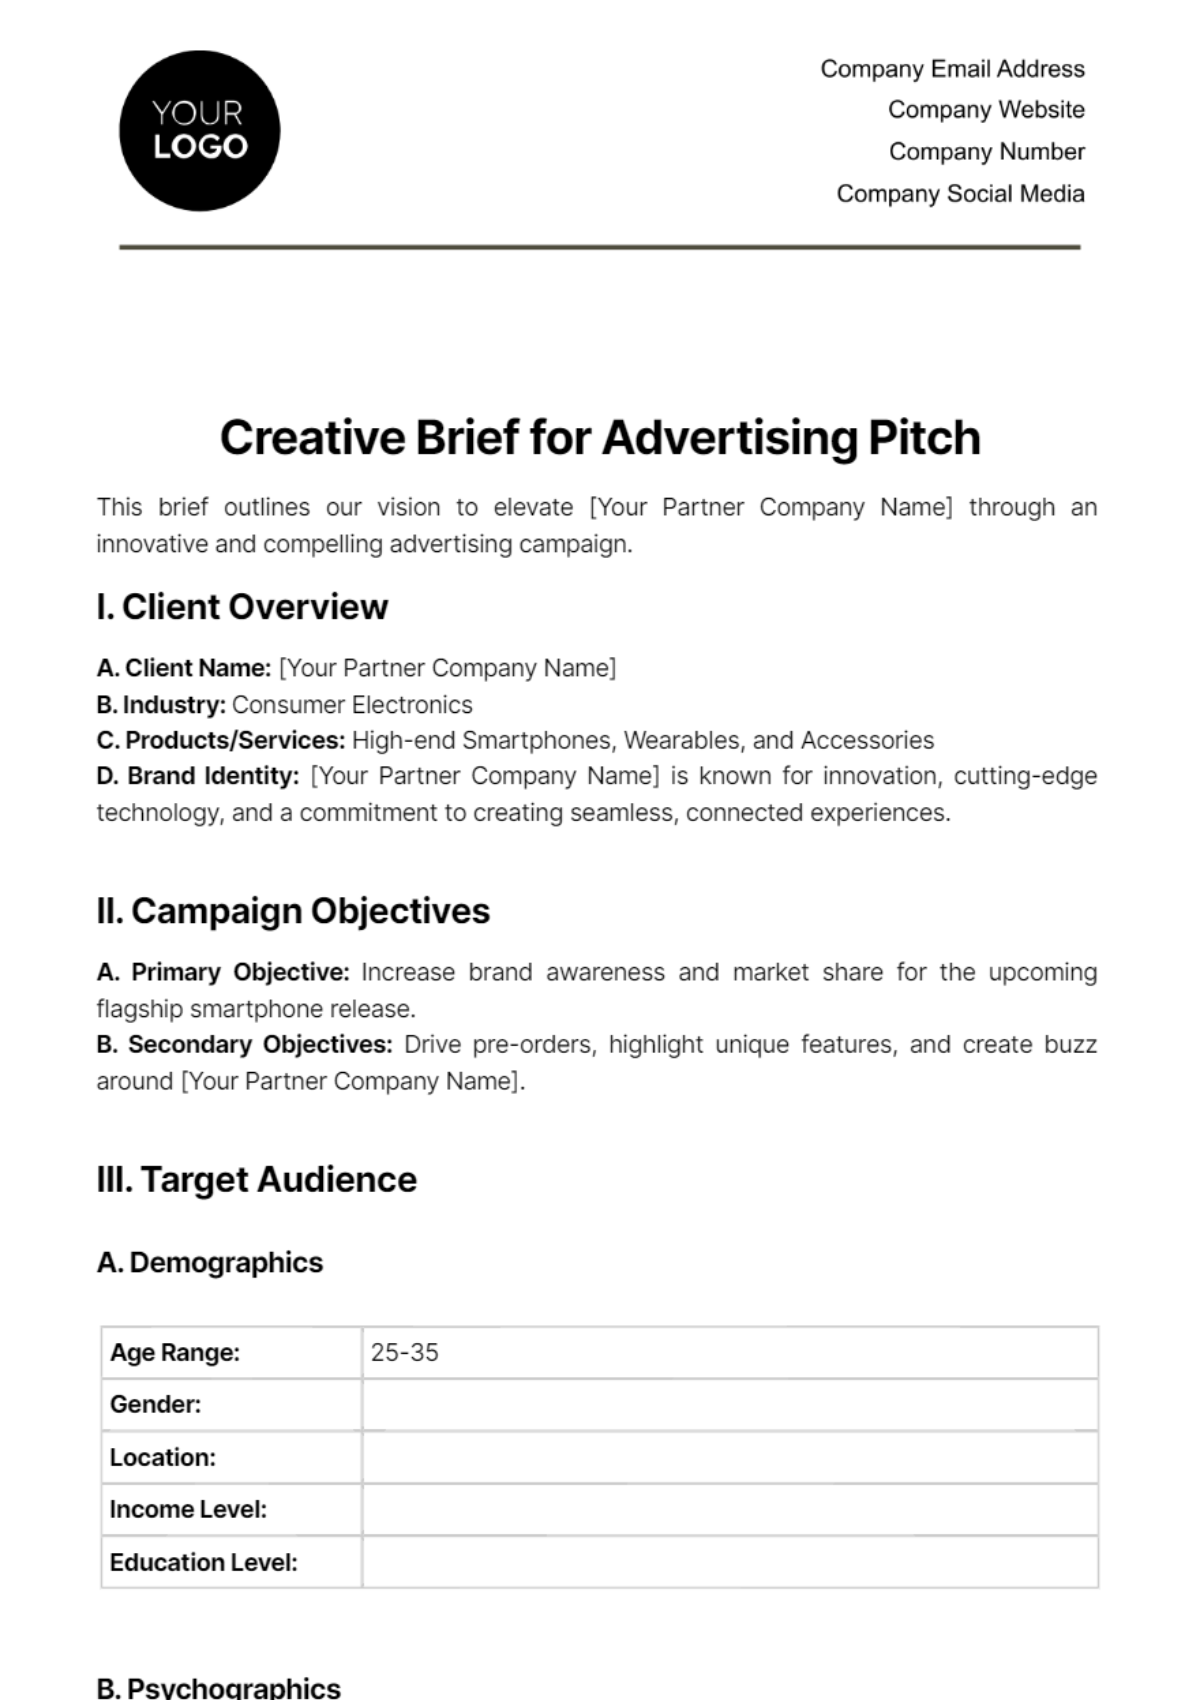 Creative Brief for Advertising Pitch Template